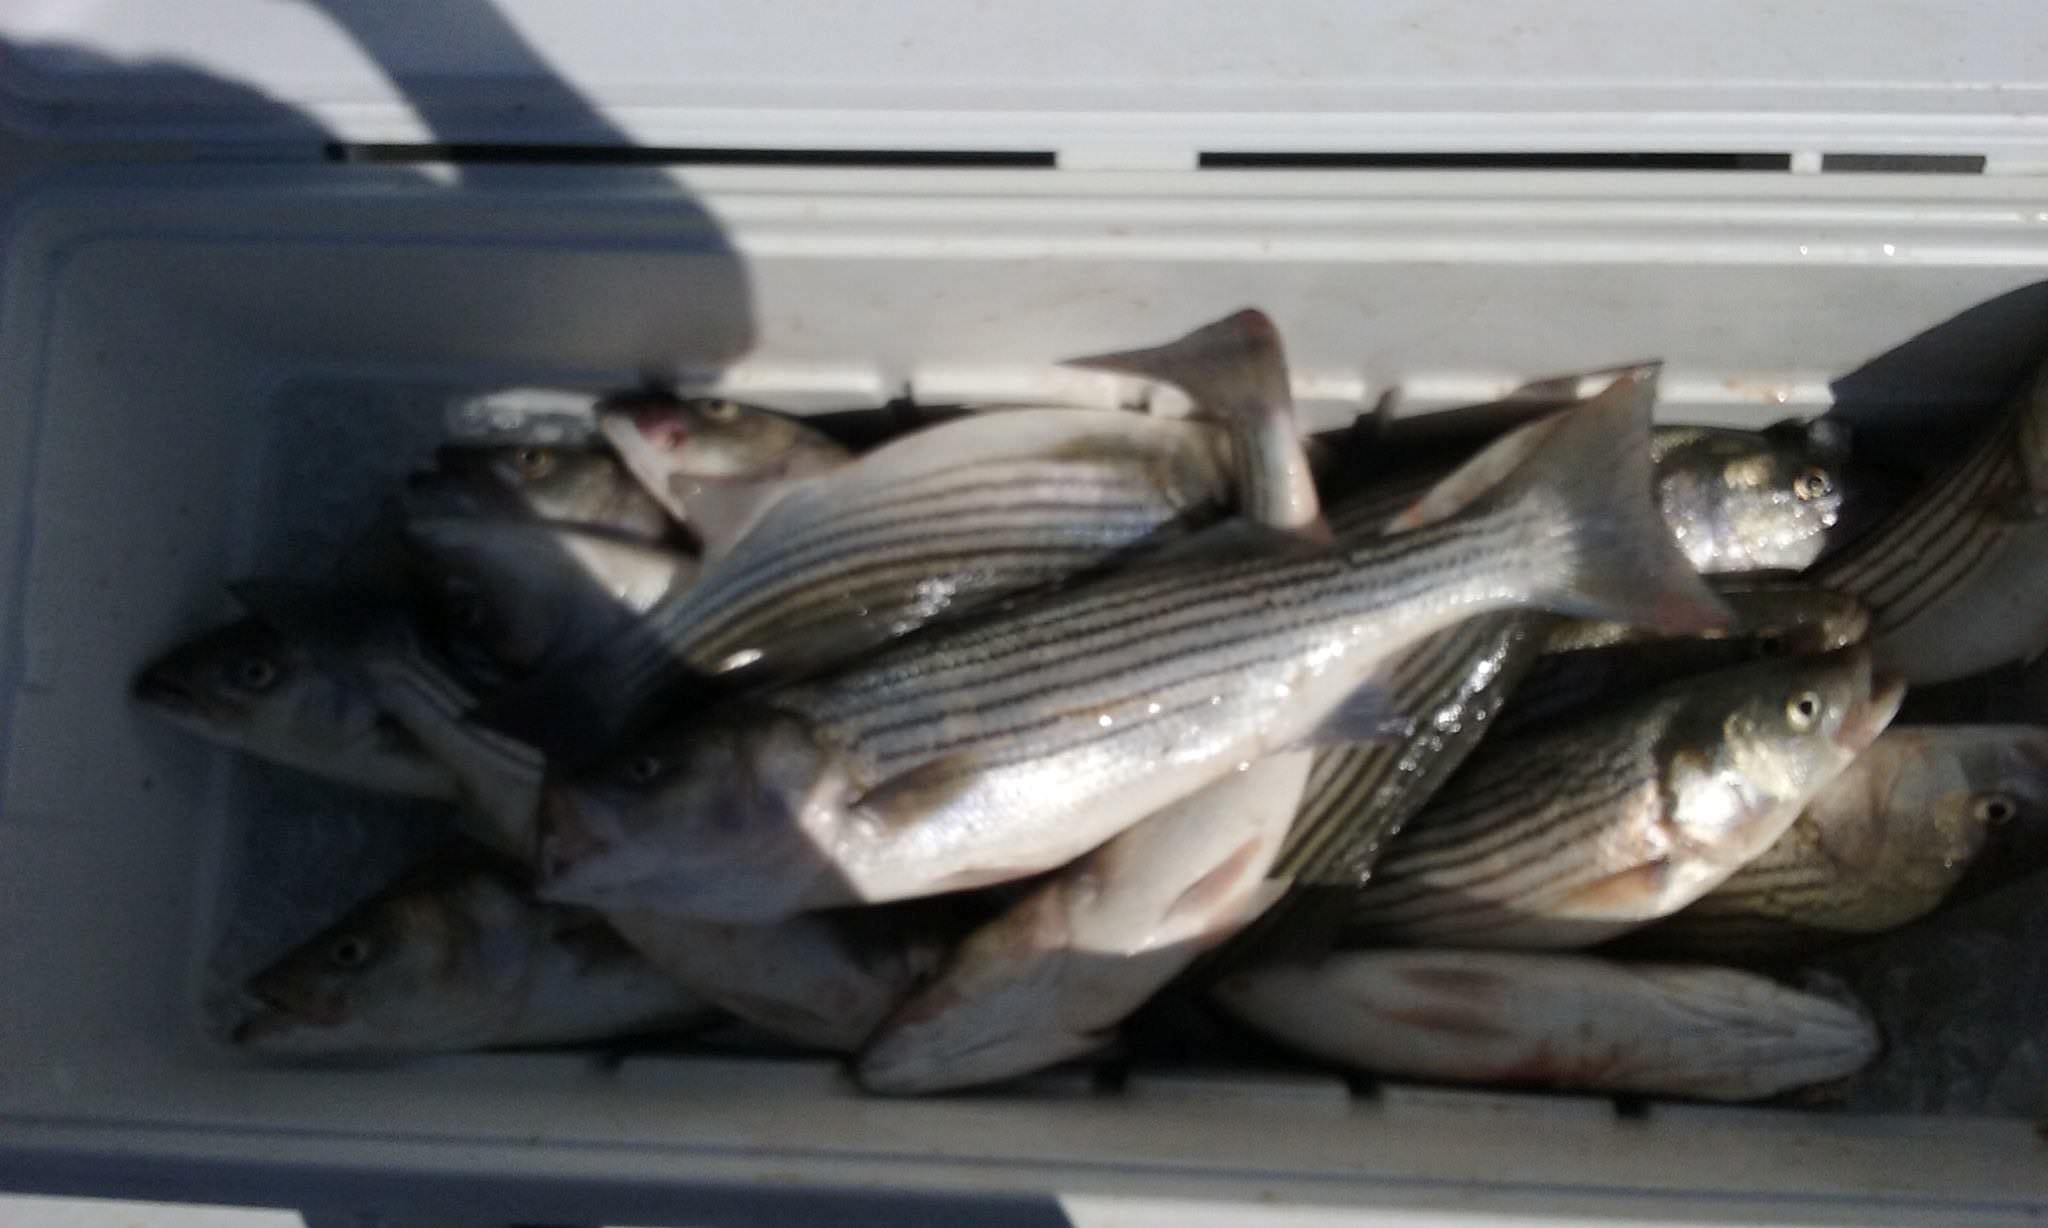 Here's A Nice Cooler Shot Of Maryland Rockfish Or Summer Stripers!